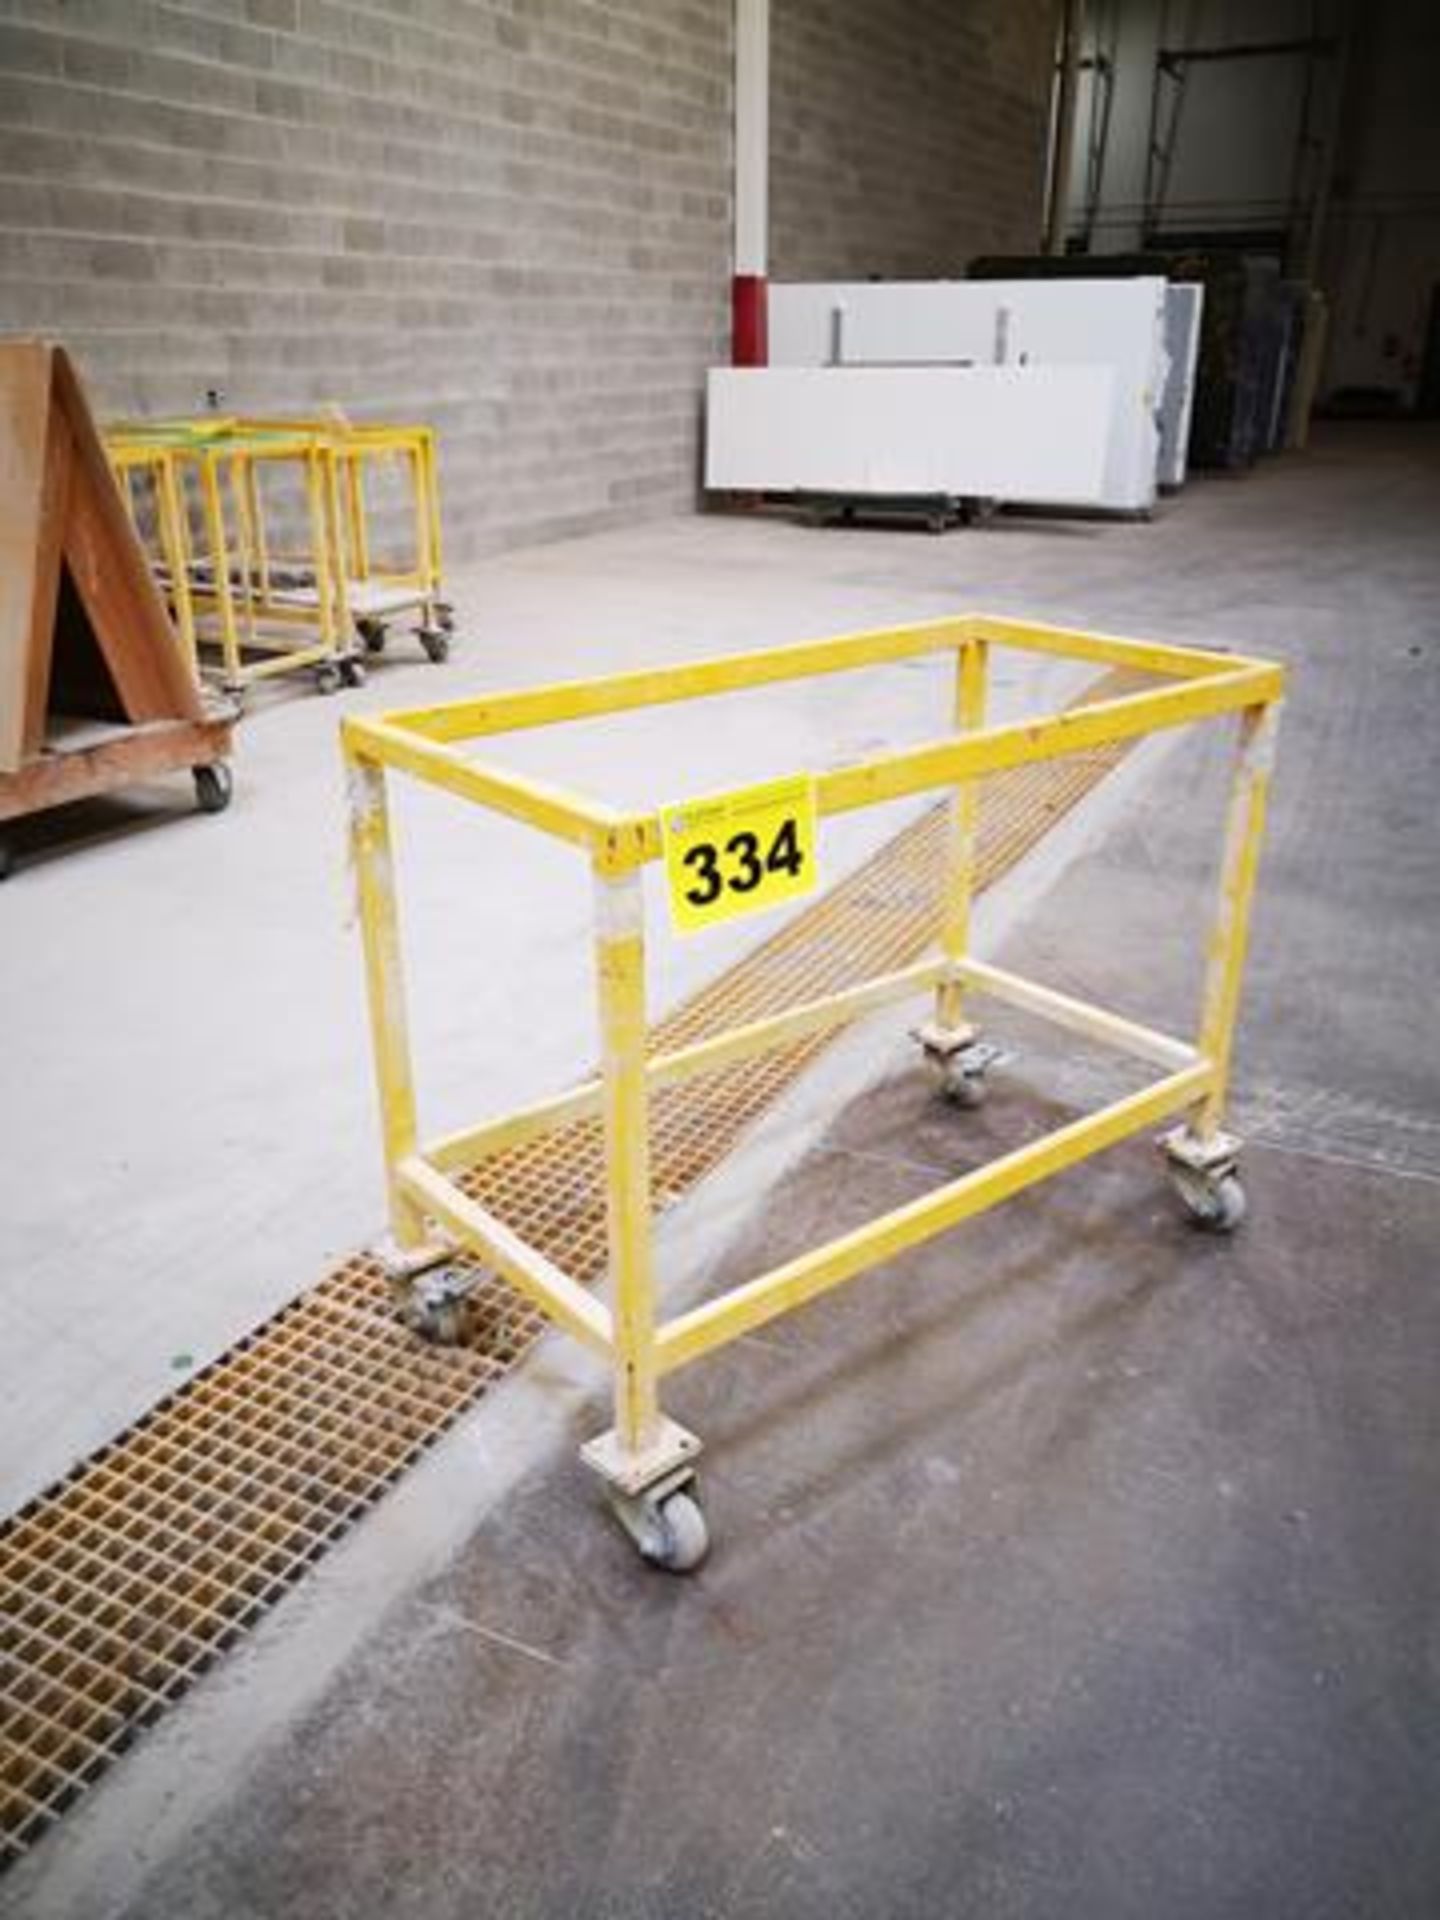 METAL FRAME SLAB FABRICATION TABLE ON CASTERS